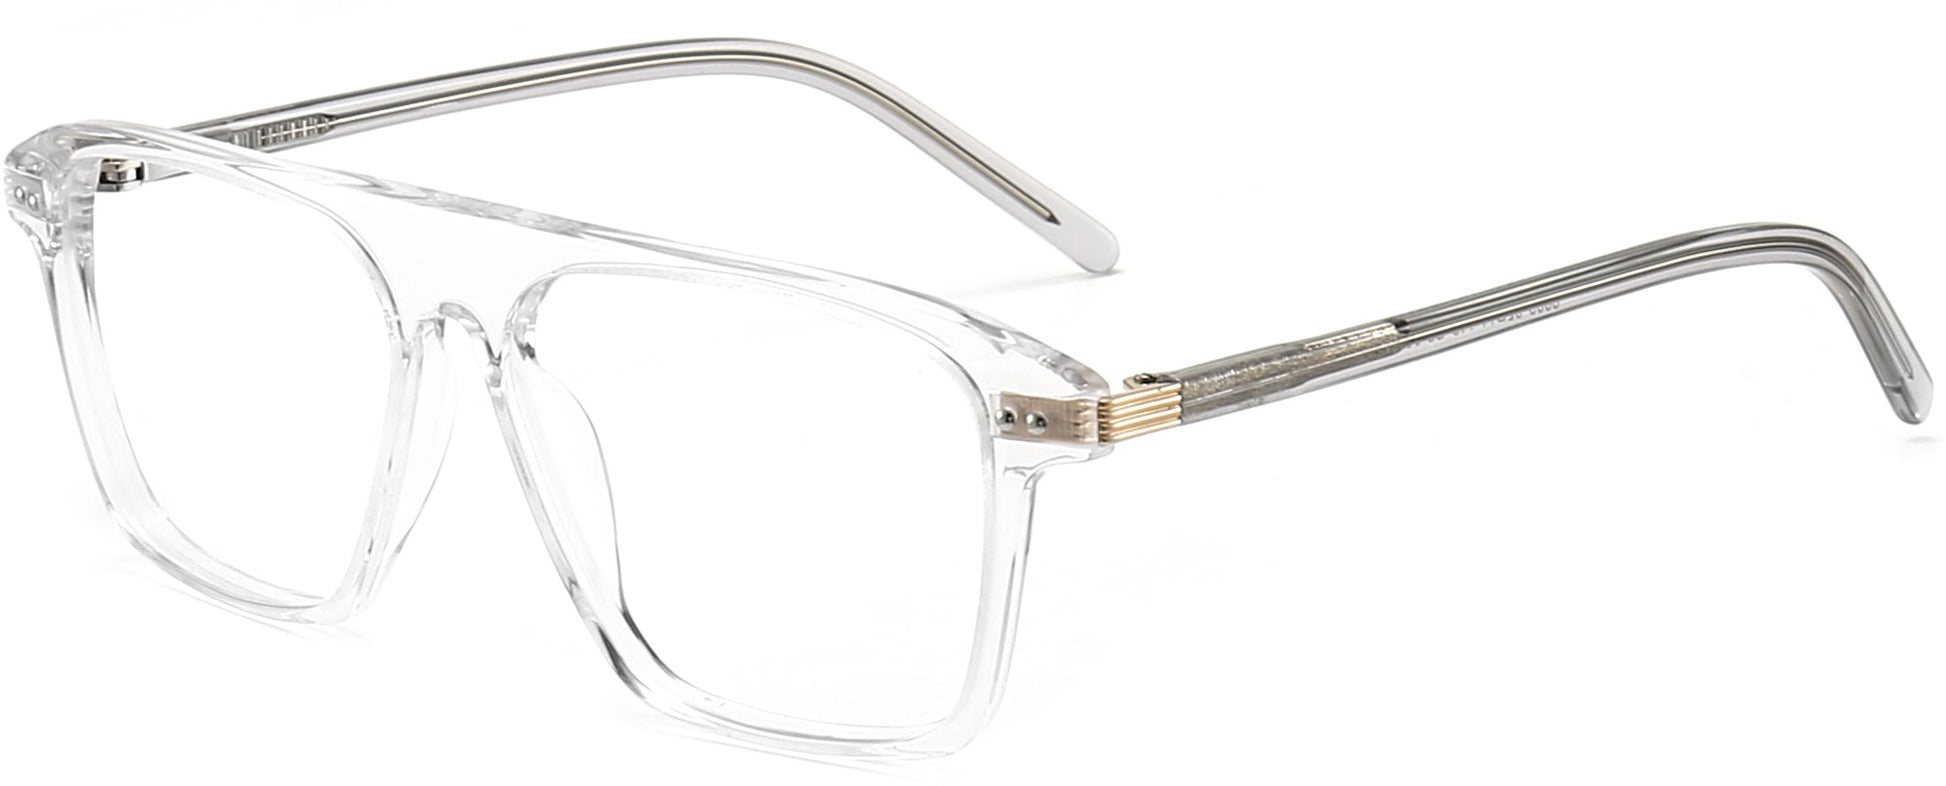 Jaziel Square Clear Eyeglasses from ANRRI, angle view